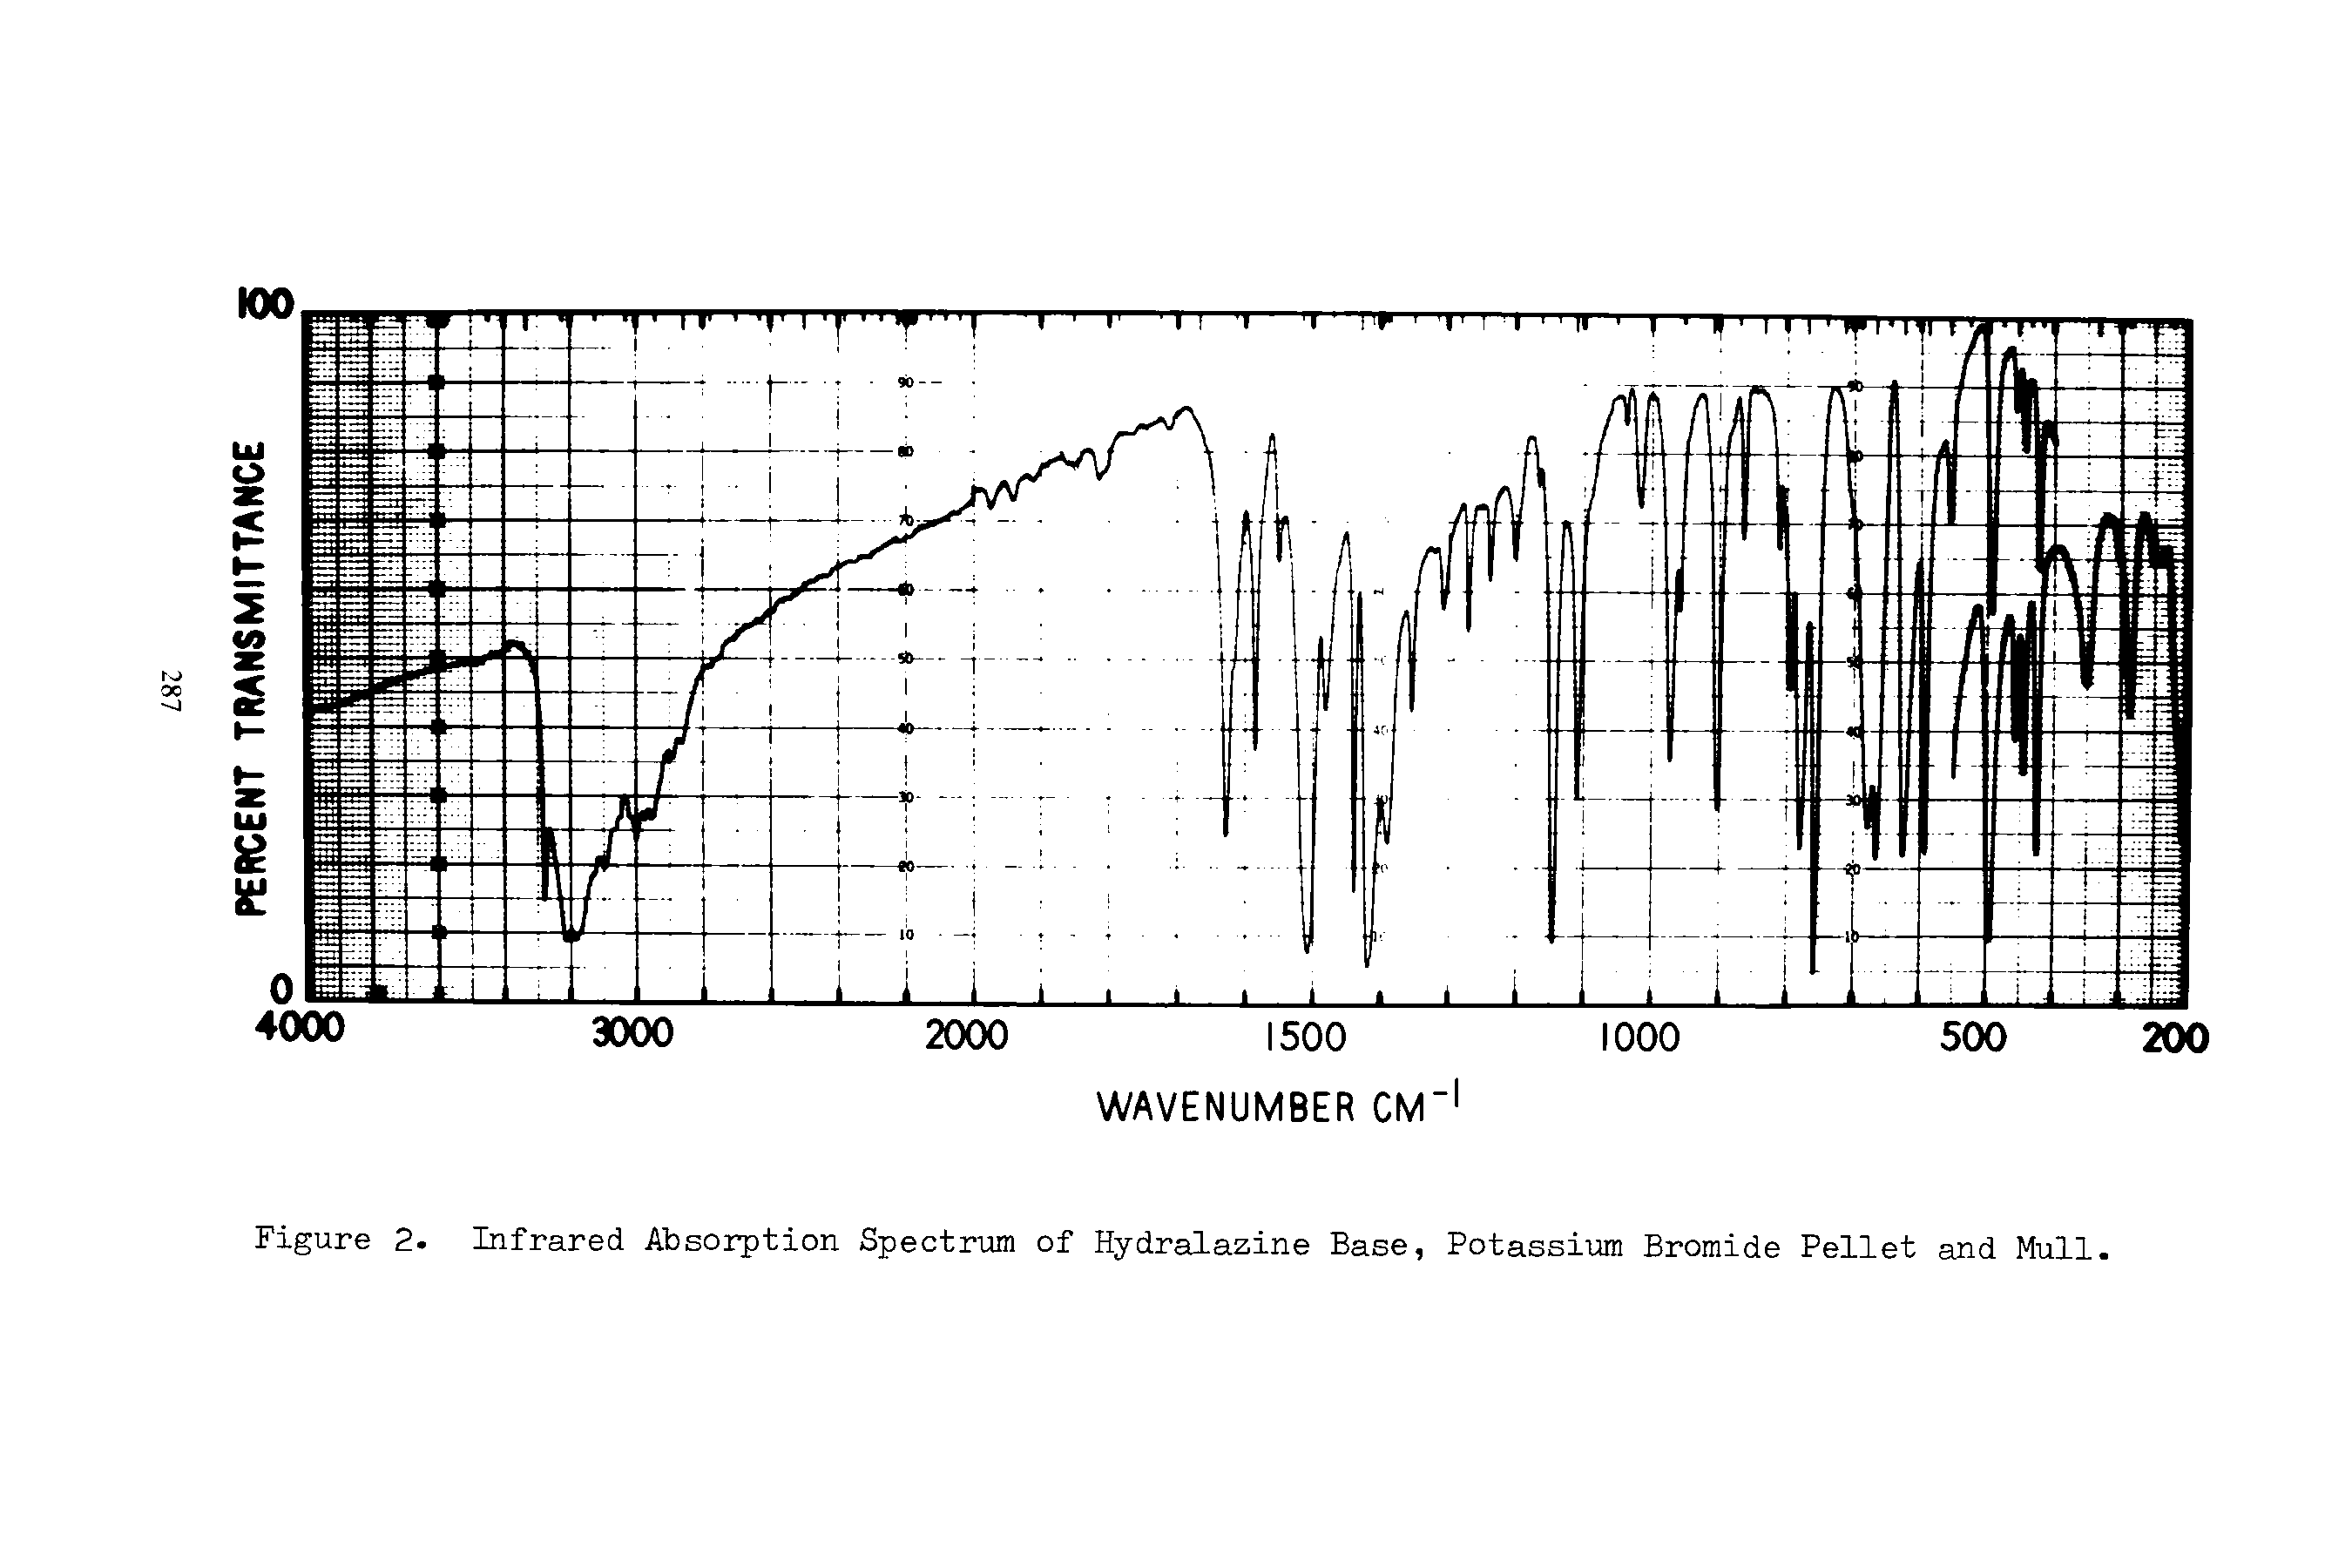 Figure 2. Infrared Absorption Spectrum of Hydralazine Base, Potassium Bromide Pellet and Mull.